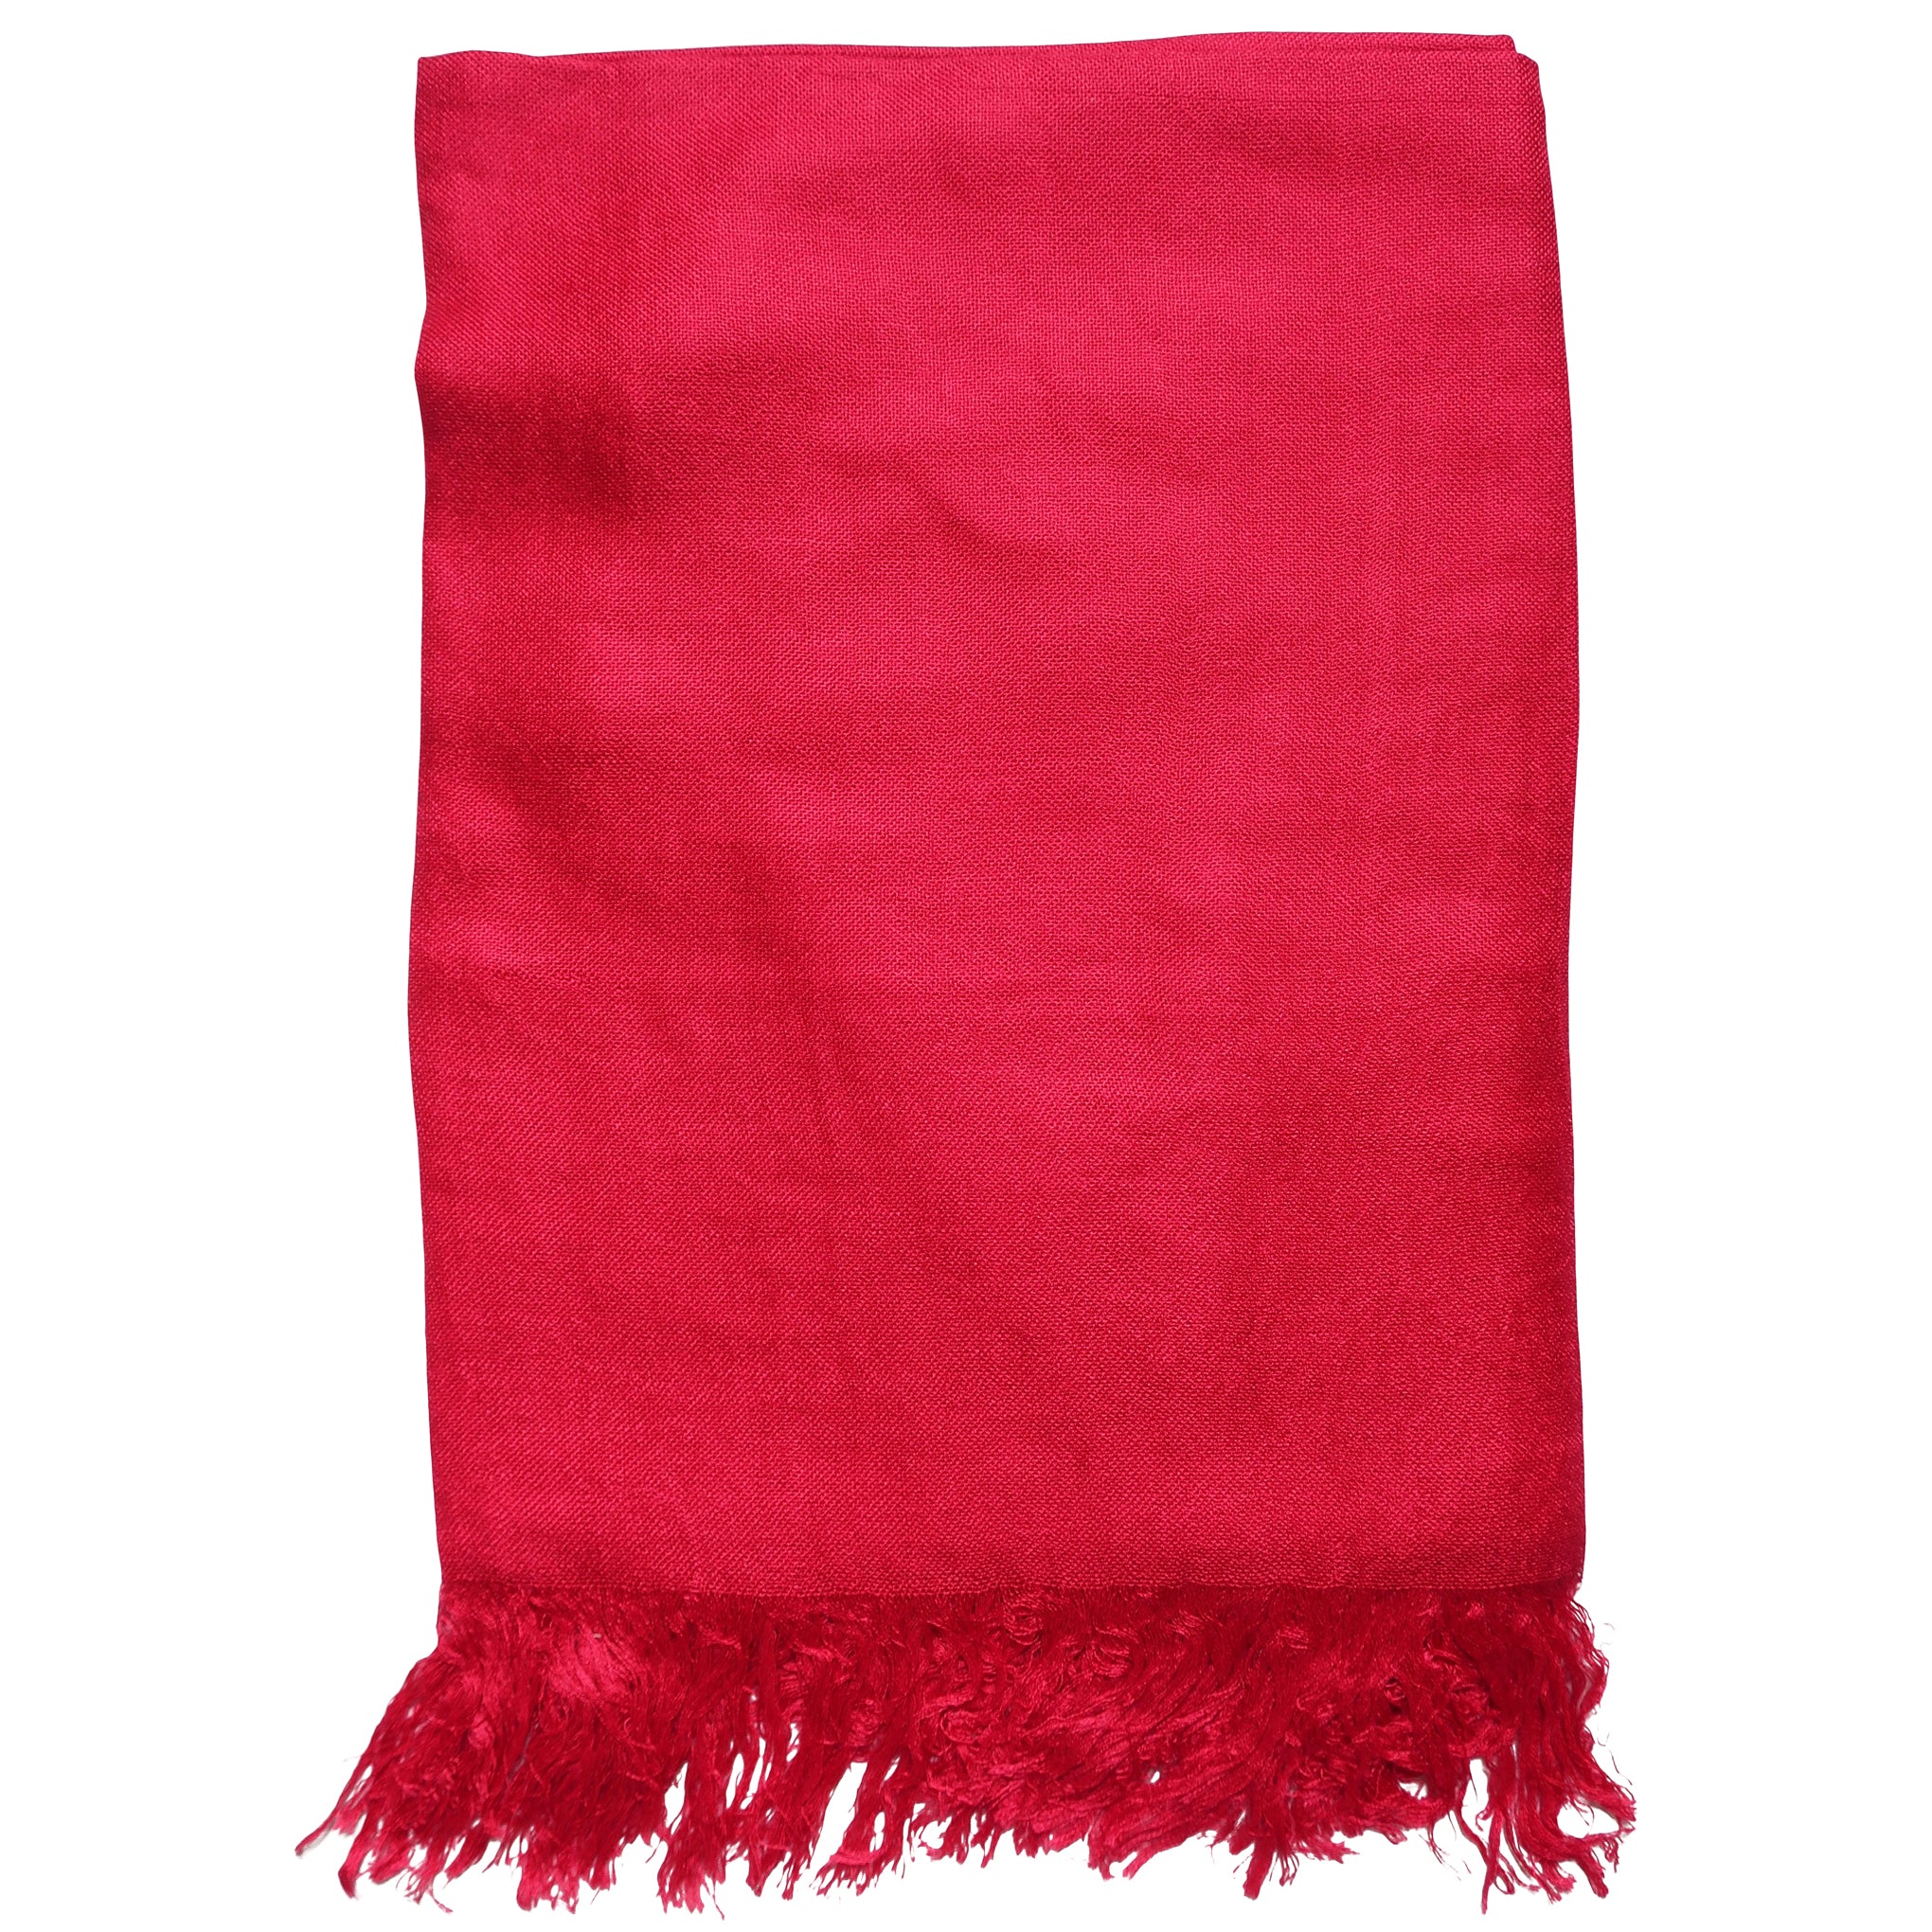 Blue Pacific Tissue Solid Modal and Cashmere Scarf Shawl in Chili Pepper Red